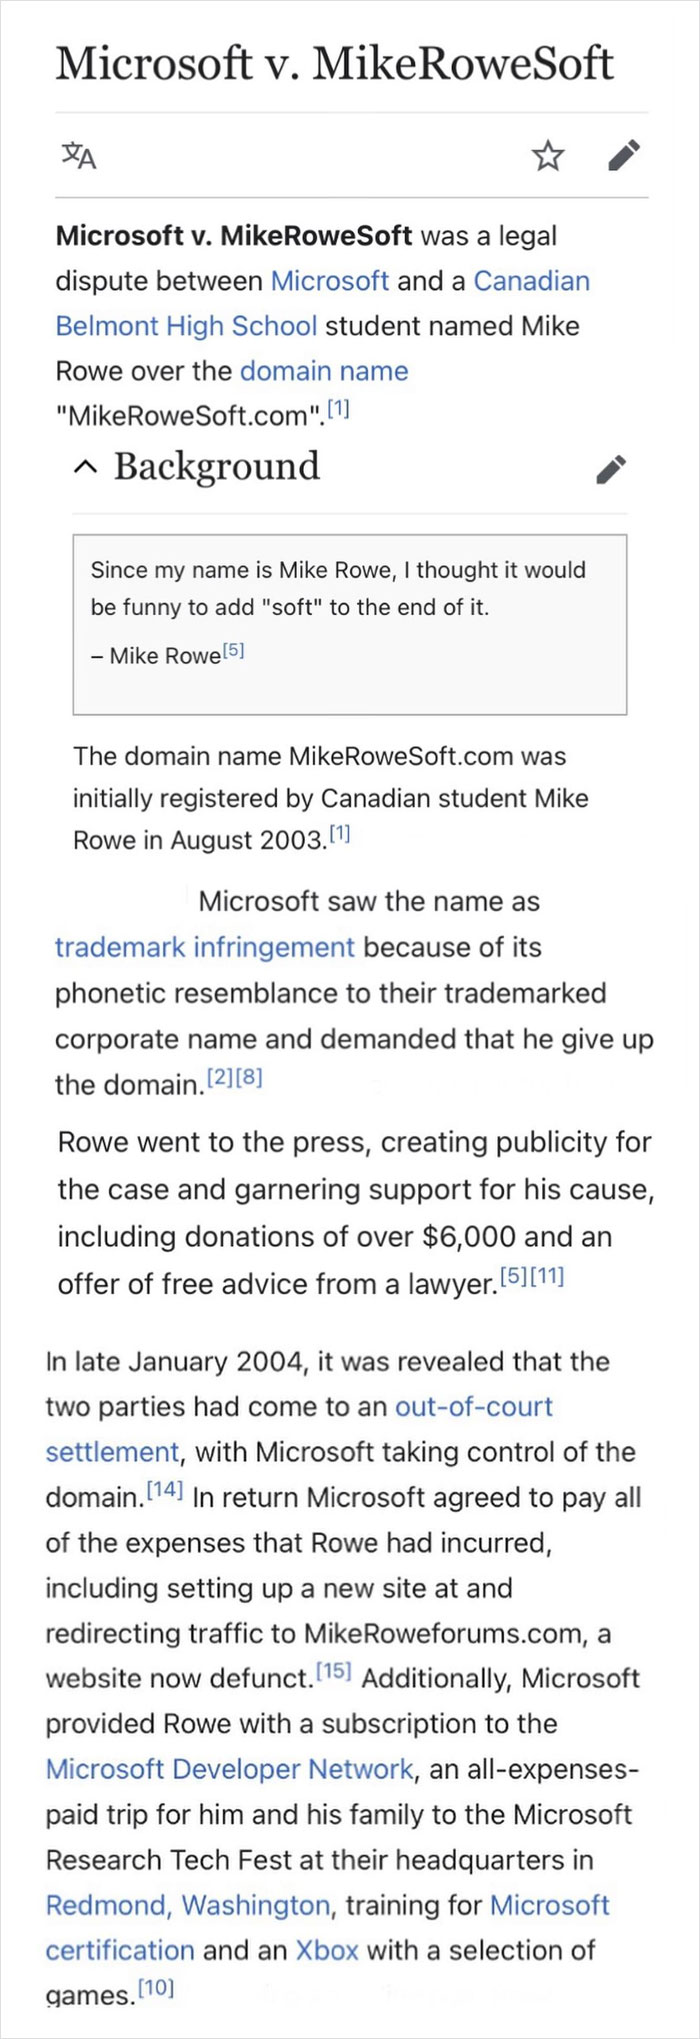 depths of wikipedia - MikeRoweSoft